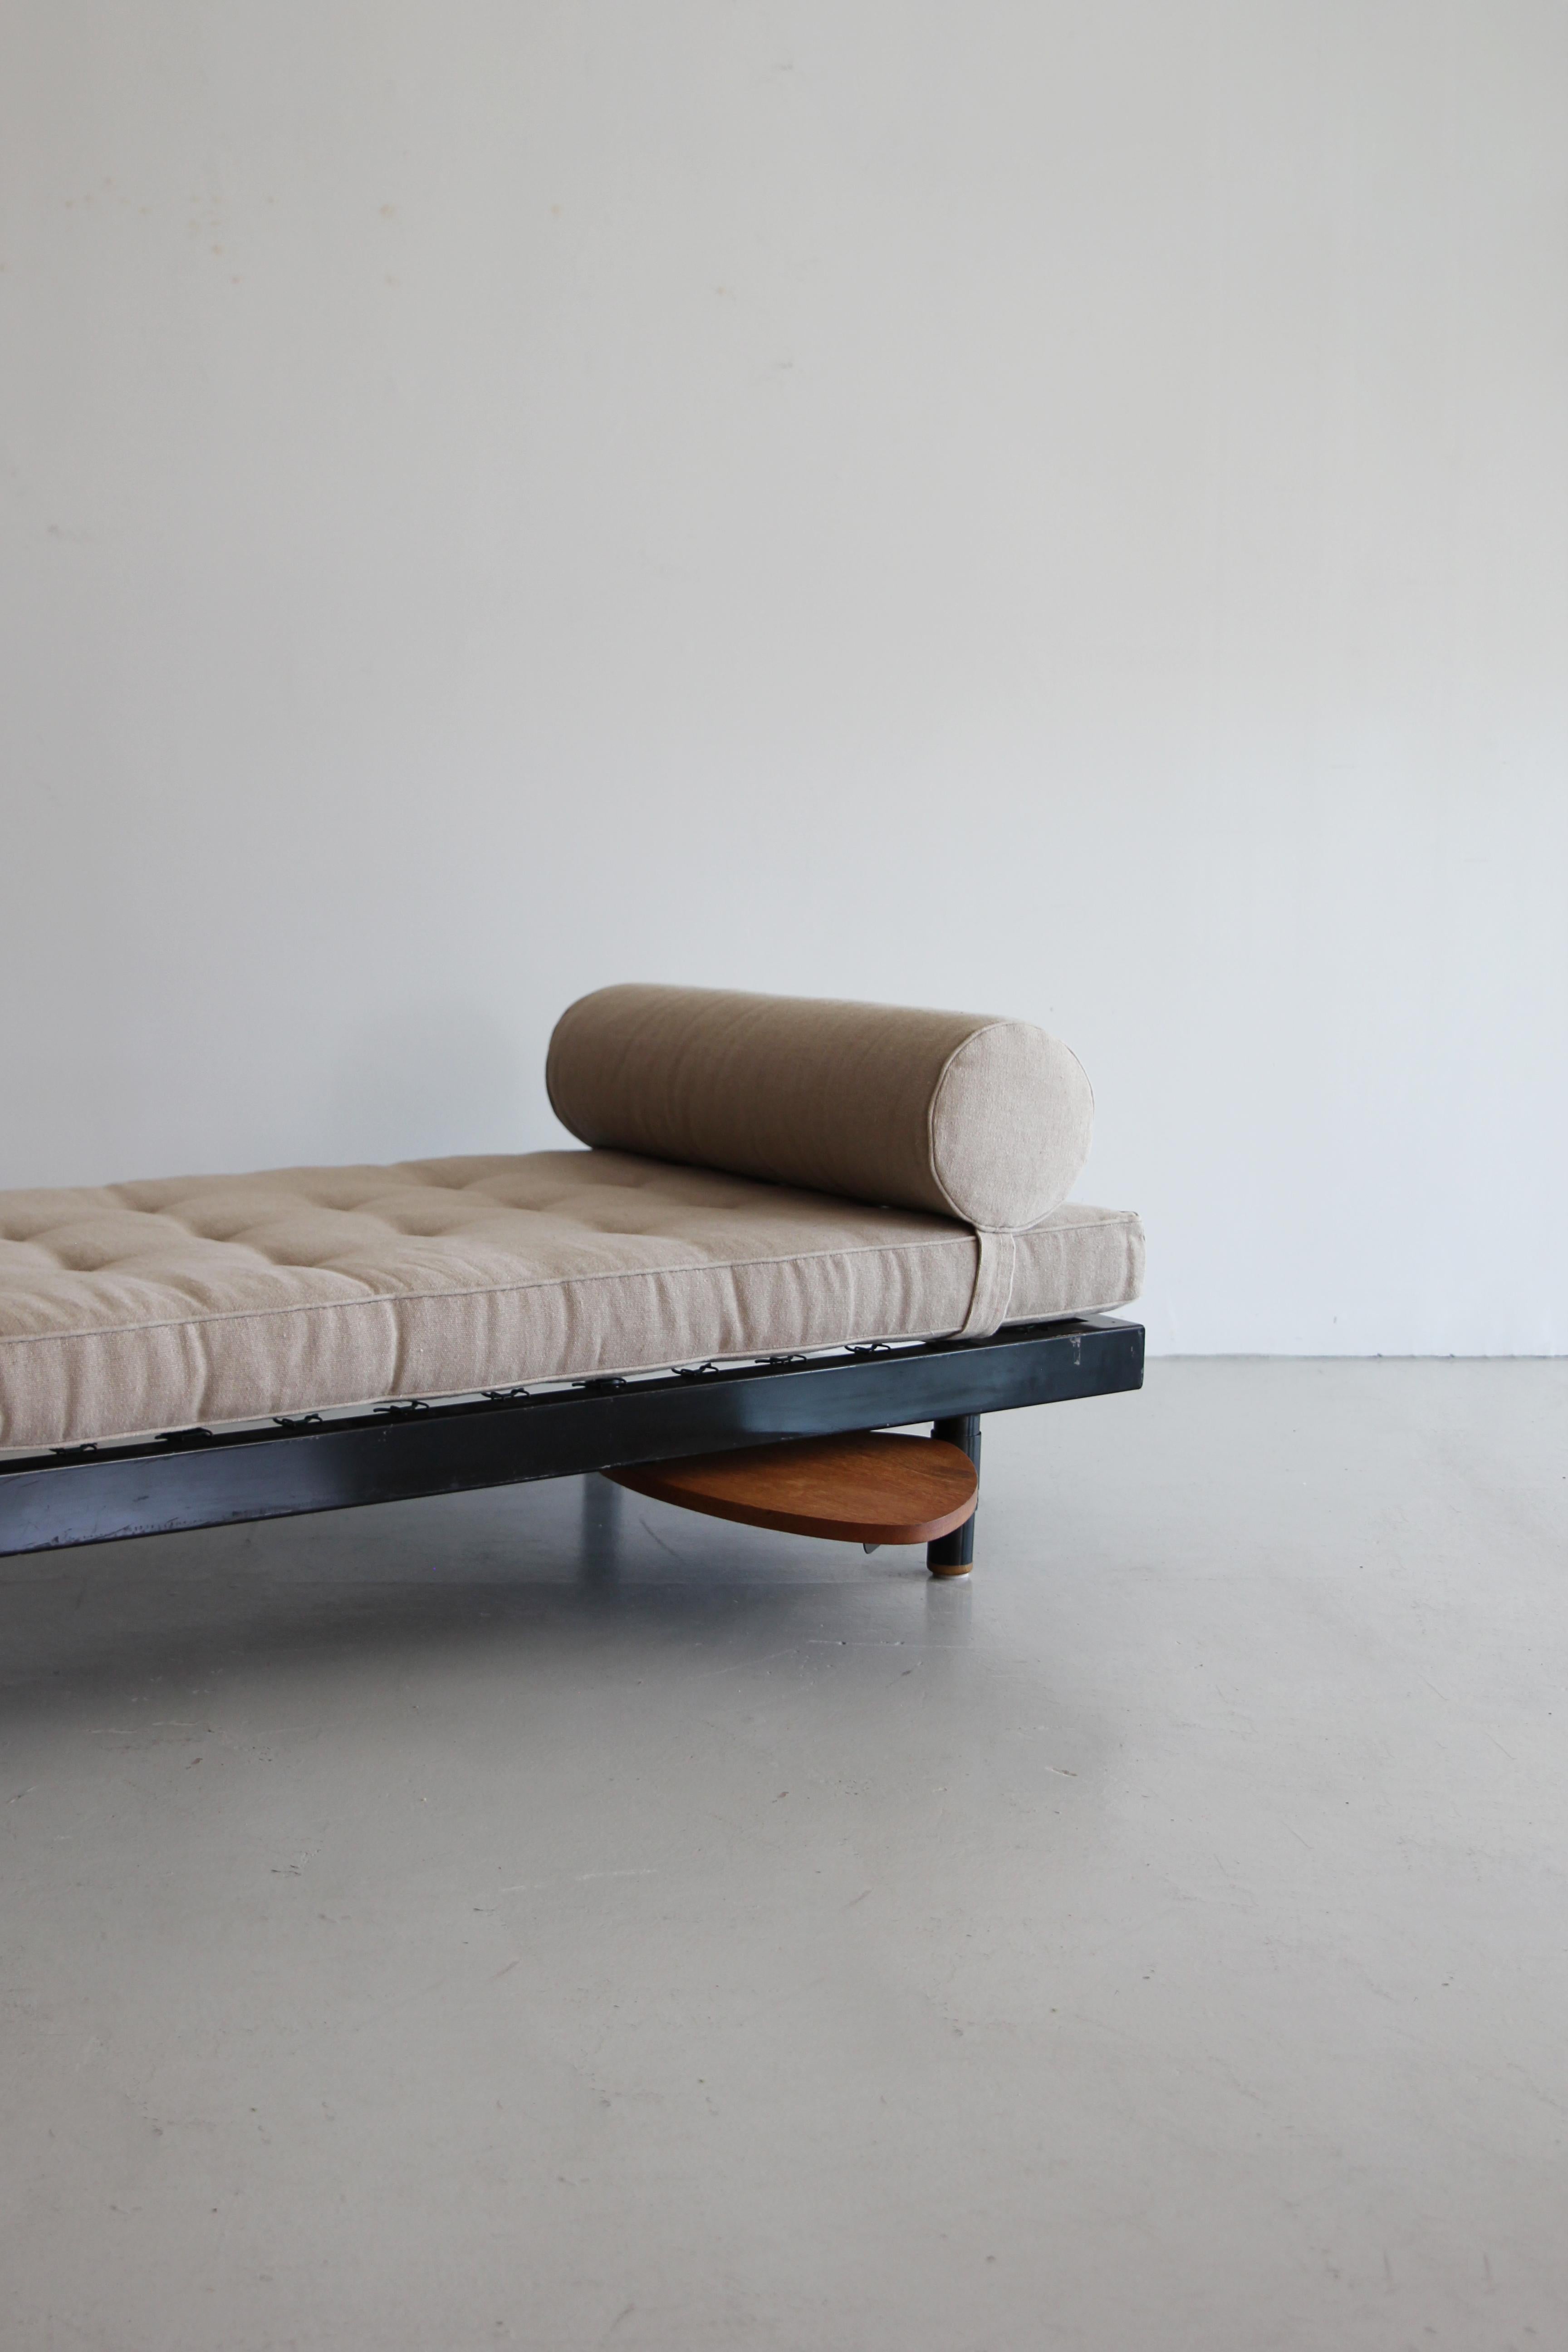 jean prouve antony daybed